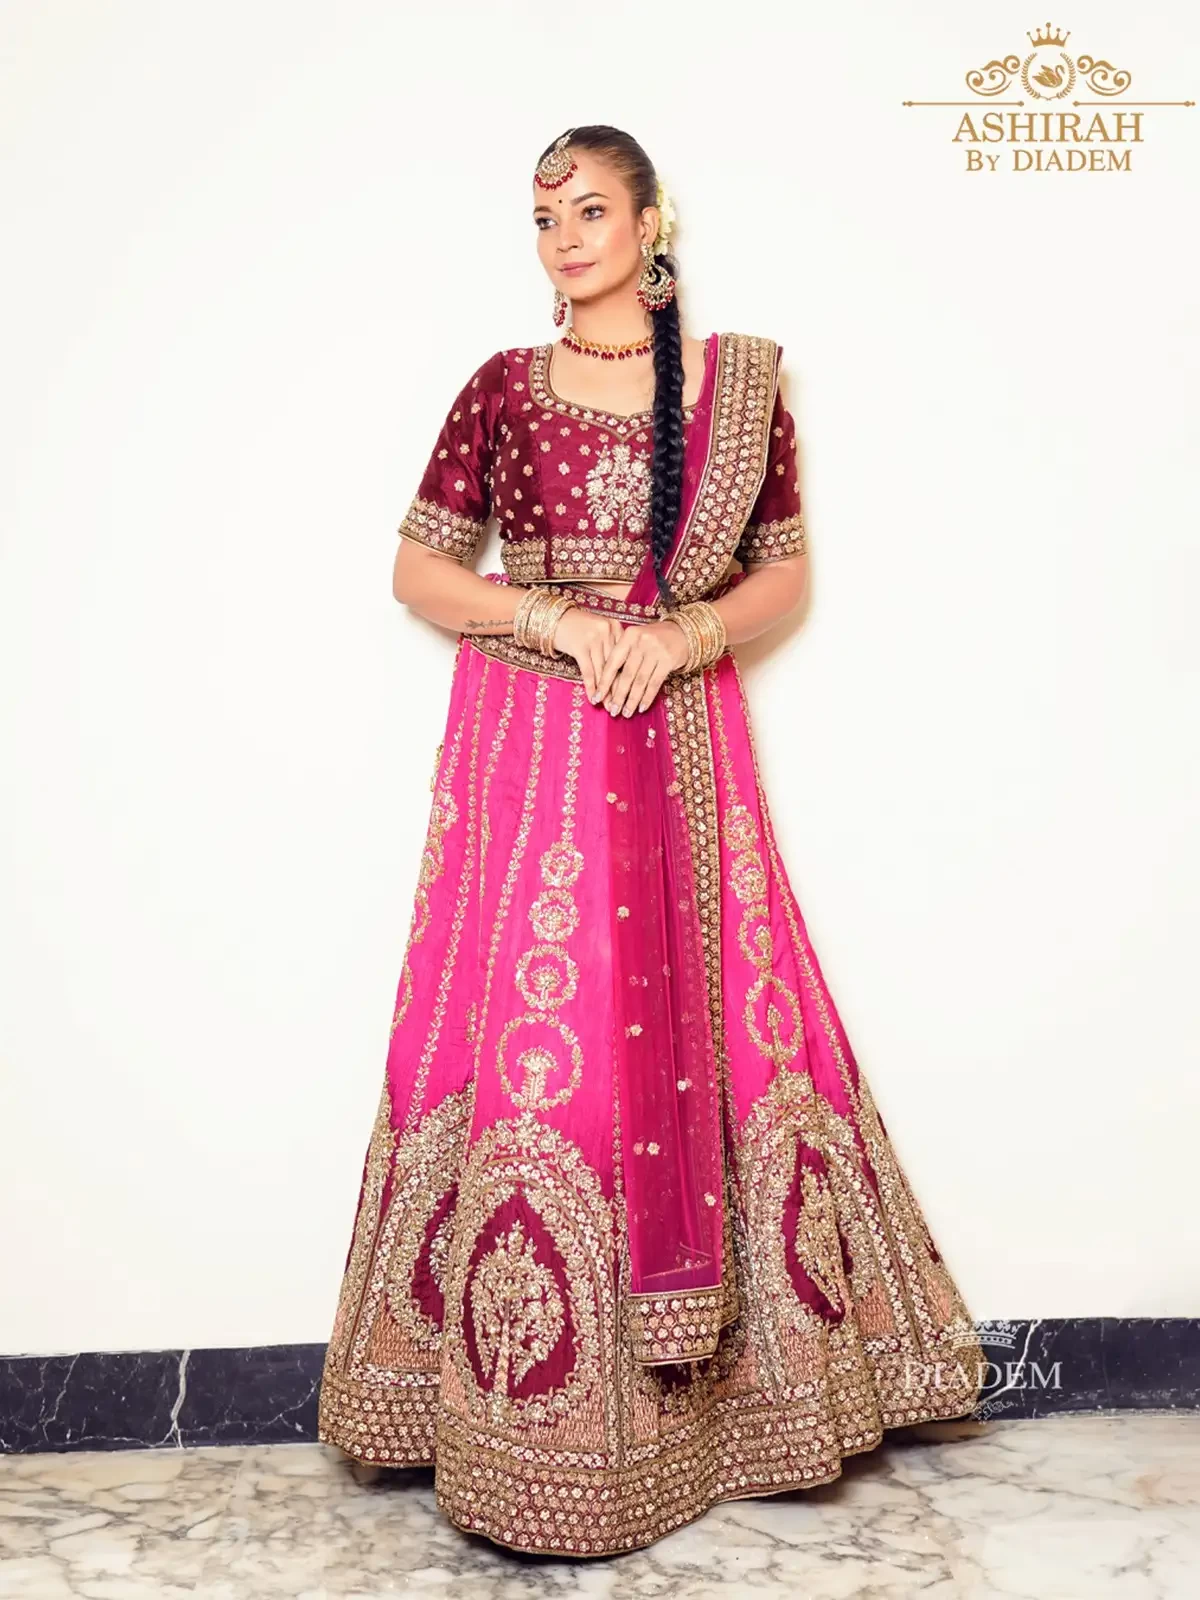 Pink Bridal Lehenga Embellished with Floral Design Beads and Stones with Dupatta